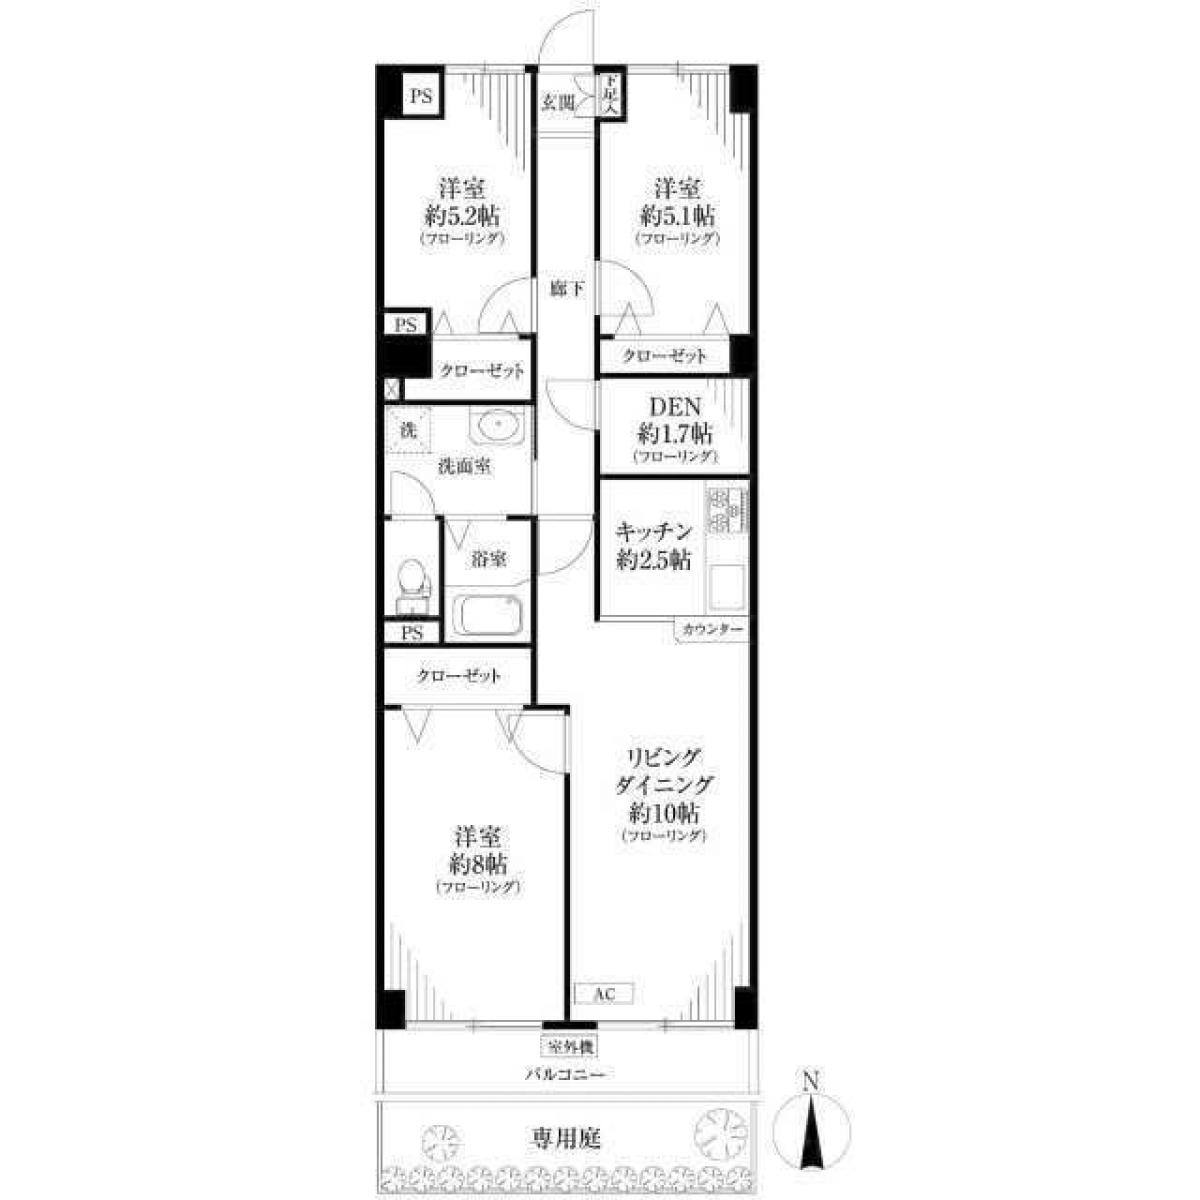 Picture of Apartment For Sale in Mitaka Shi, Tokyo, Japan